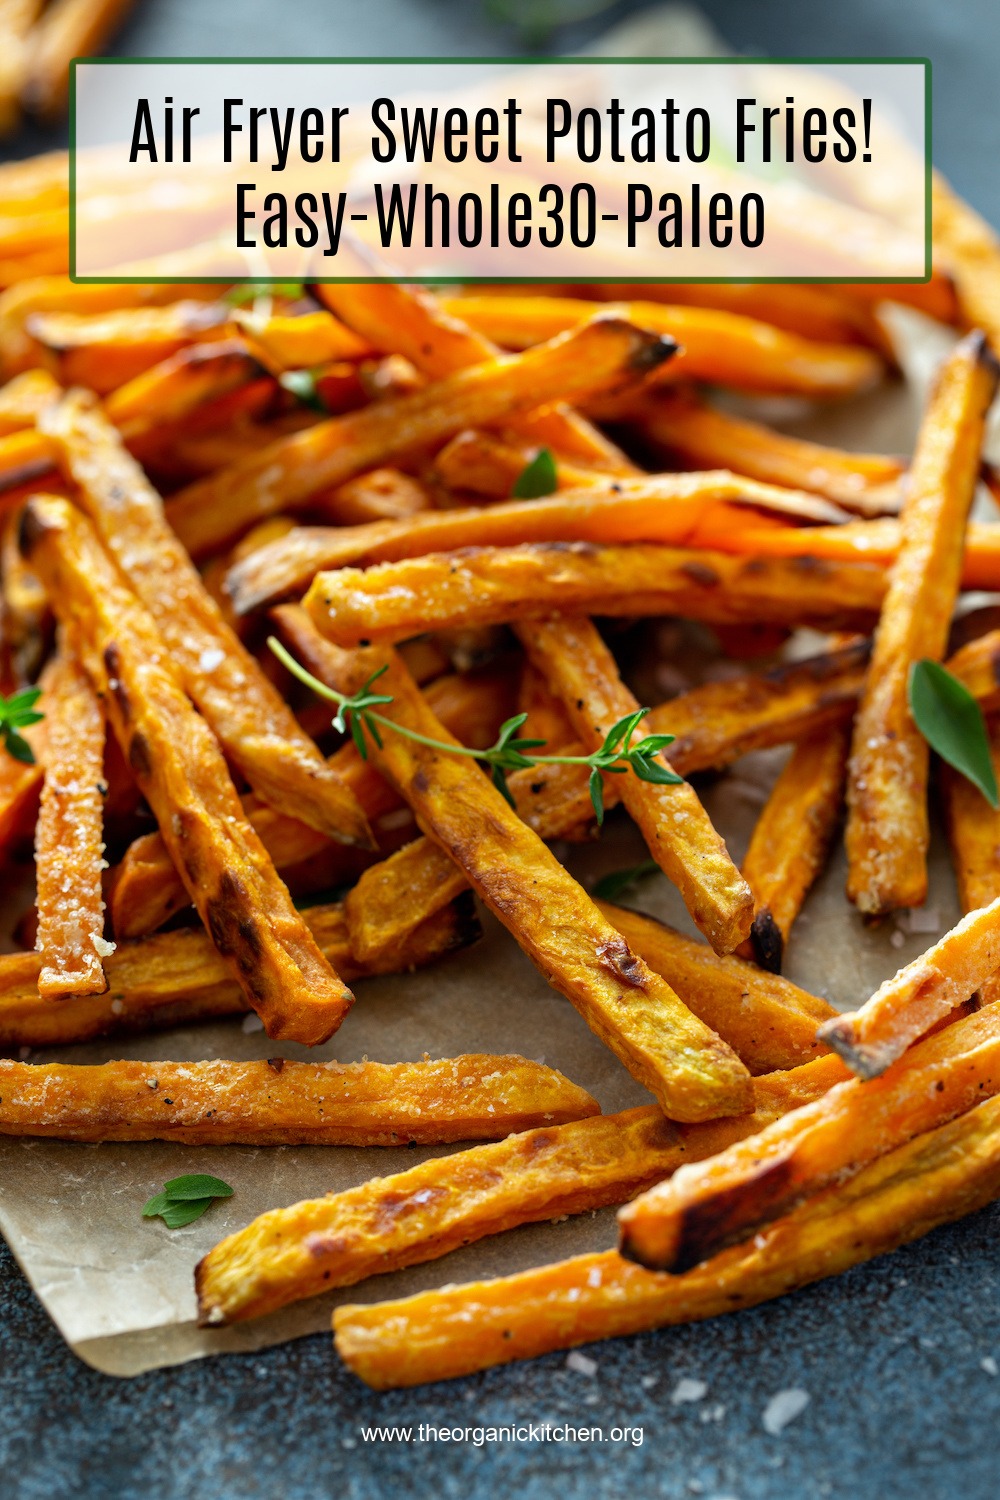 Air Fryer Sweet Potato Fries (Whole30) garnished with thyme and sea salt